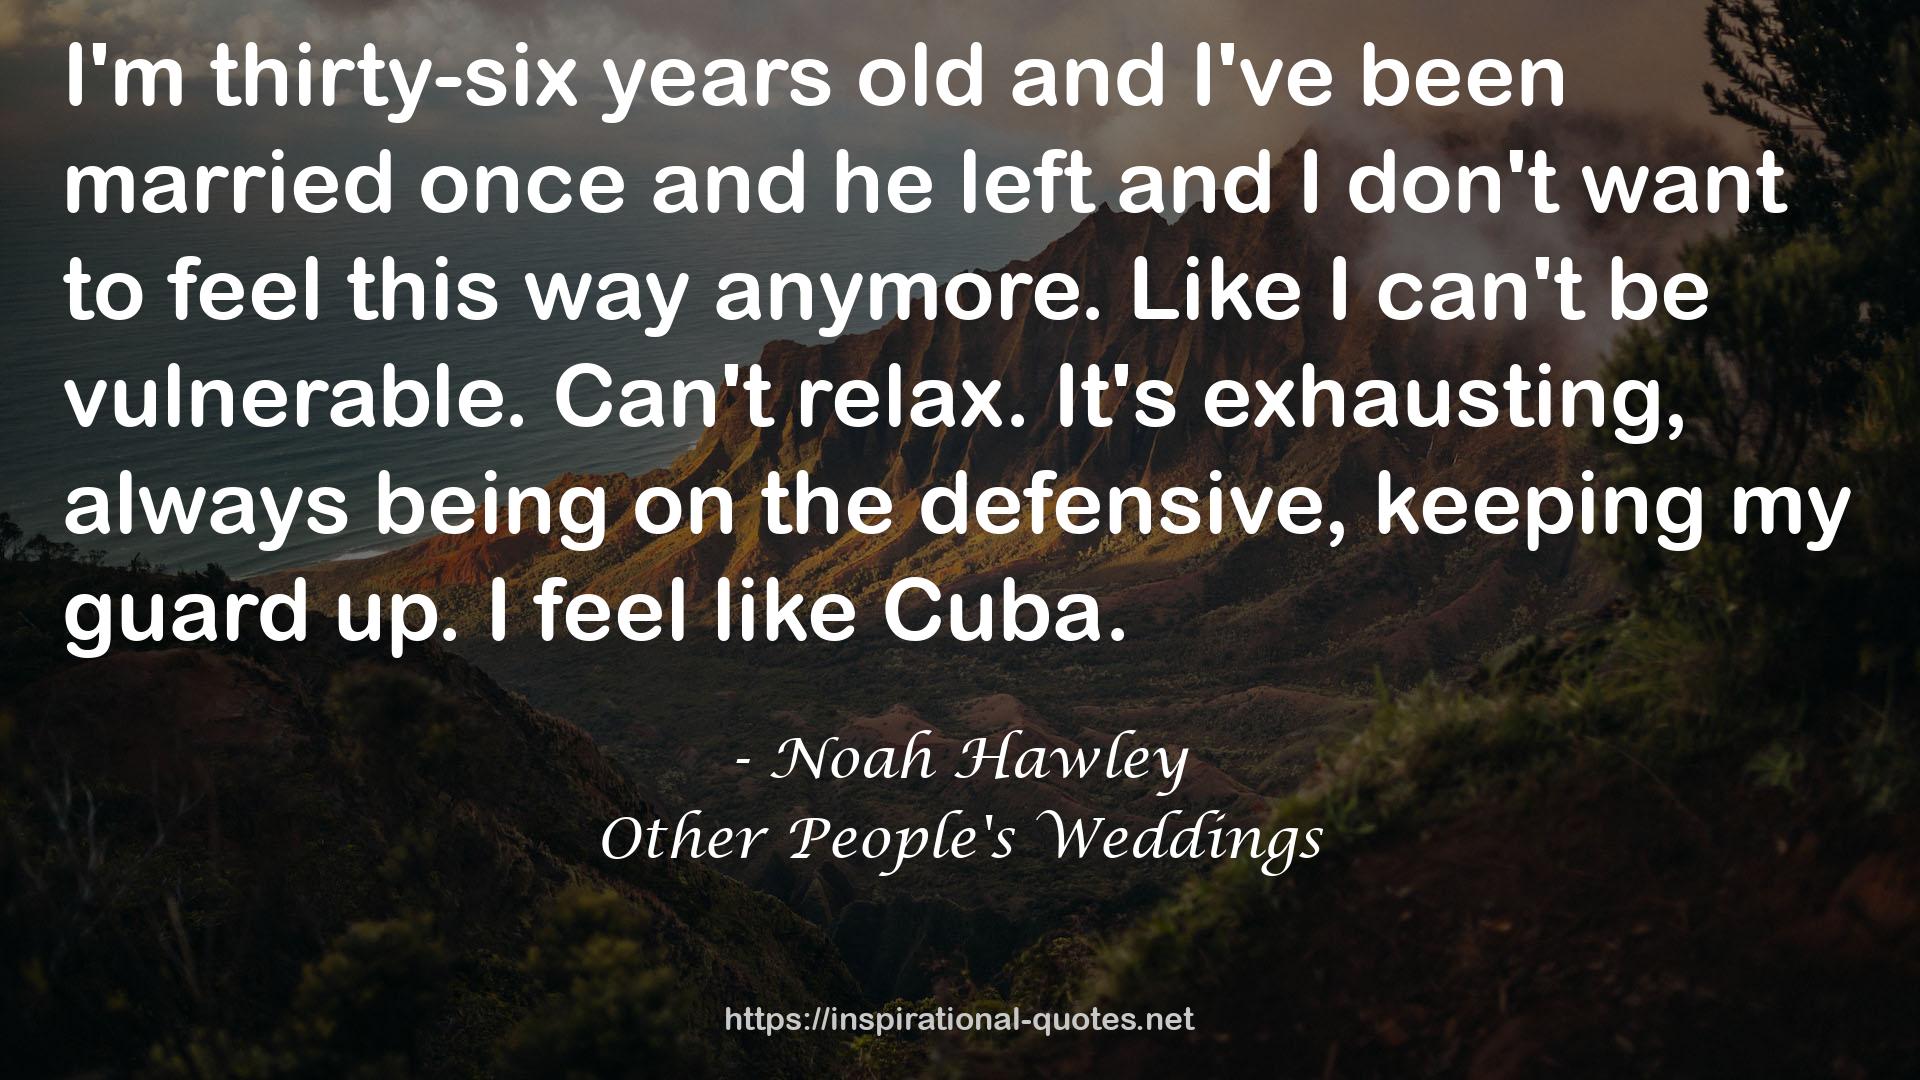 Other People's Weddings QUOTES